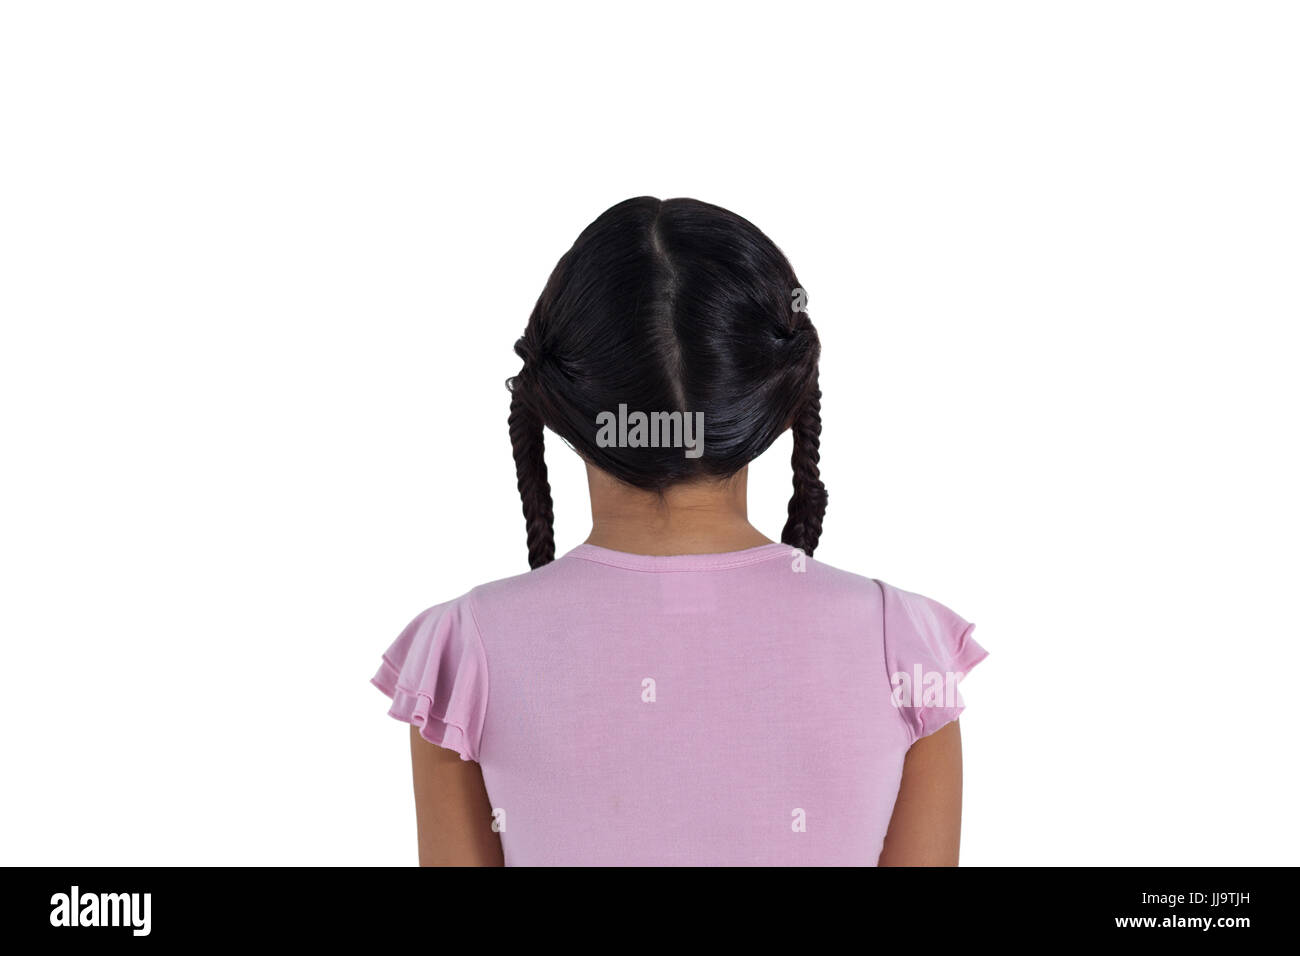 Rear view of girl standing against white background Stock Photo